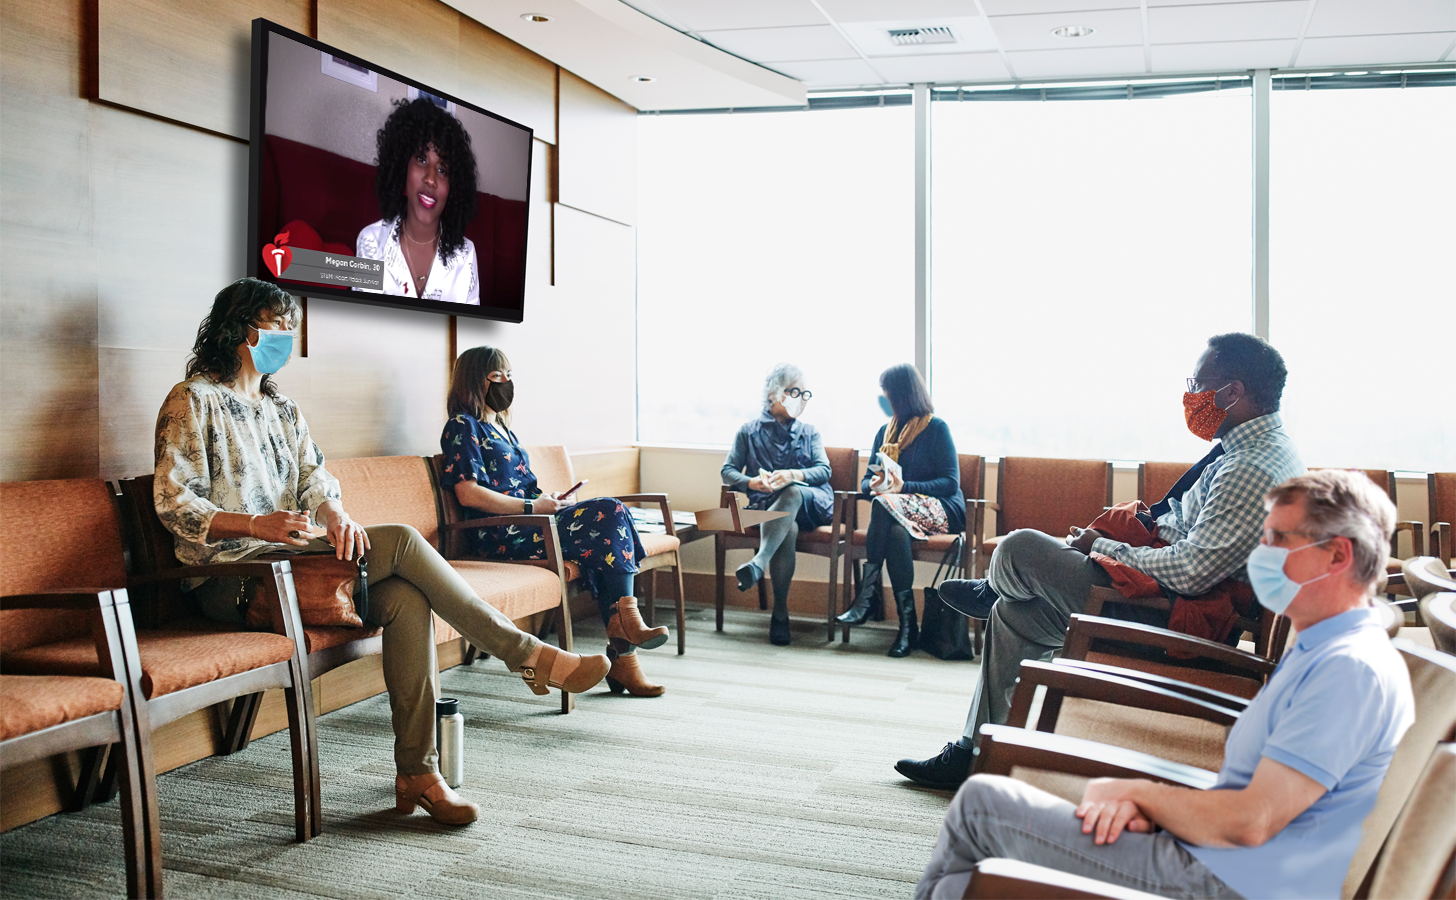 A group of patients in a waiting room views content on a digital screen